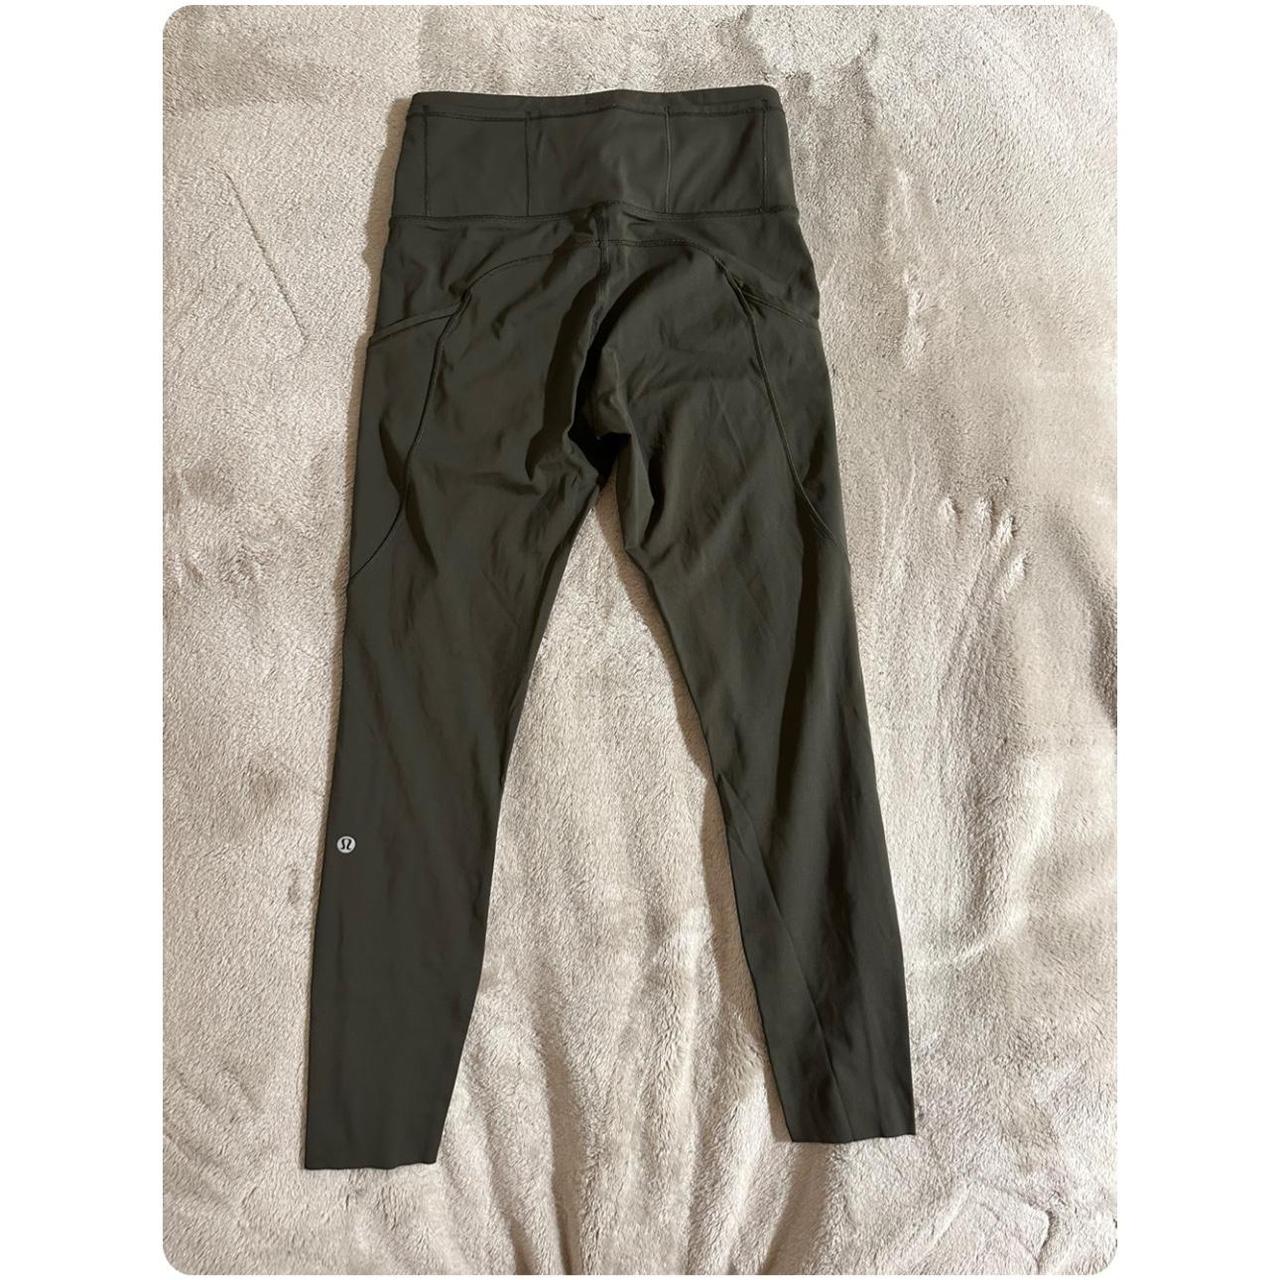 Lululemon Fast and Free High Rise Tight 25” ❤️‍🔥Great - Depop